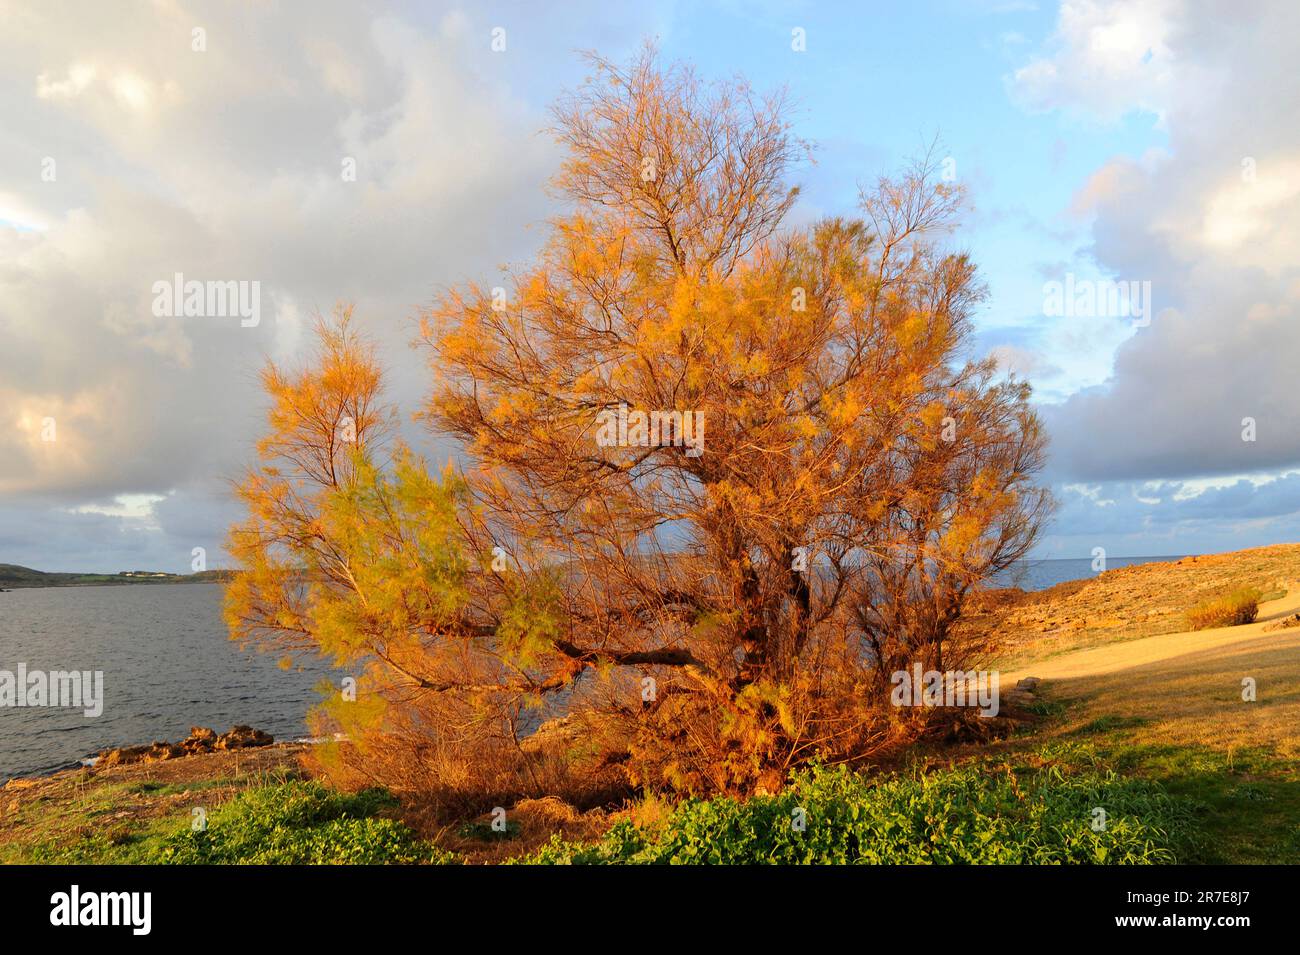 Tamarisk or salt cedar (Tamarix africana) is a bush or little tree with scale-like leaves. It tolerates salt well. Tamaricaceae family. This photo was Stock Photo